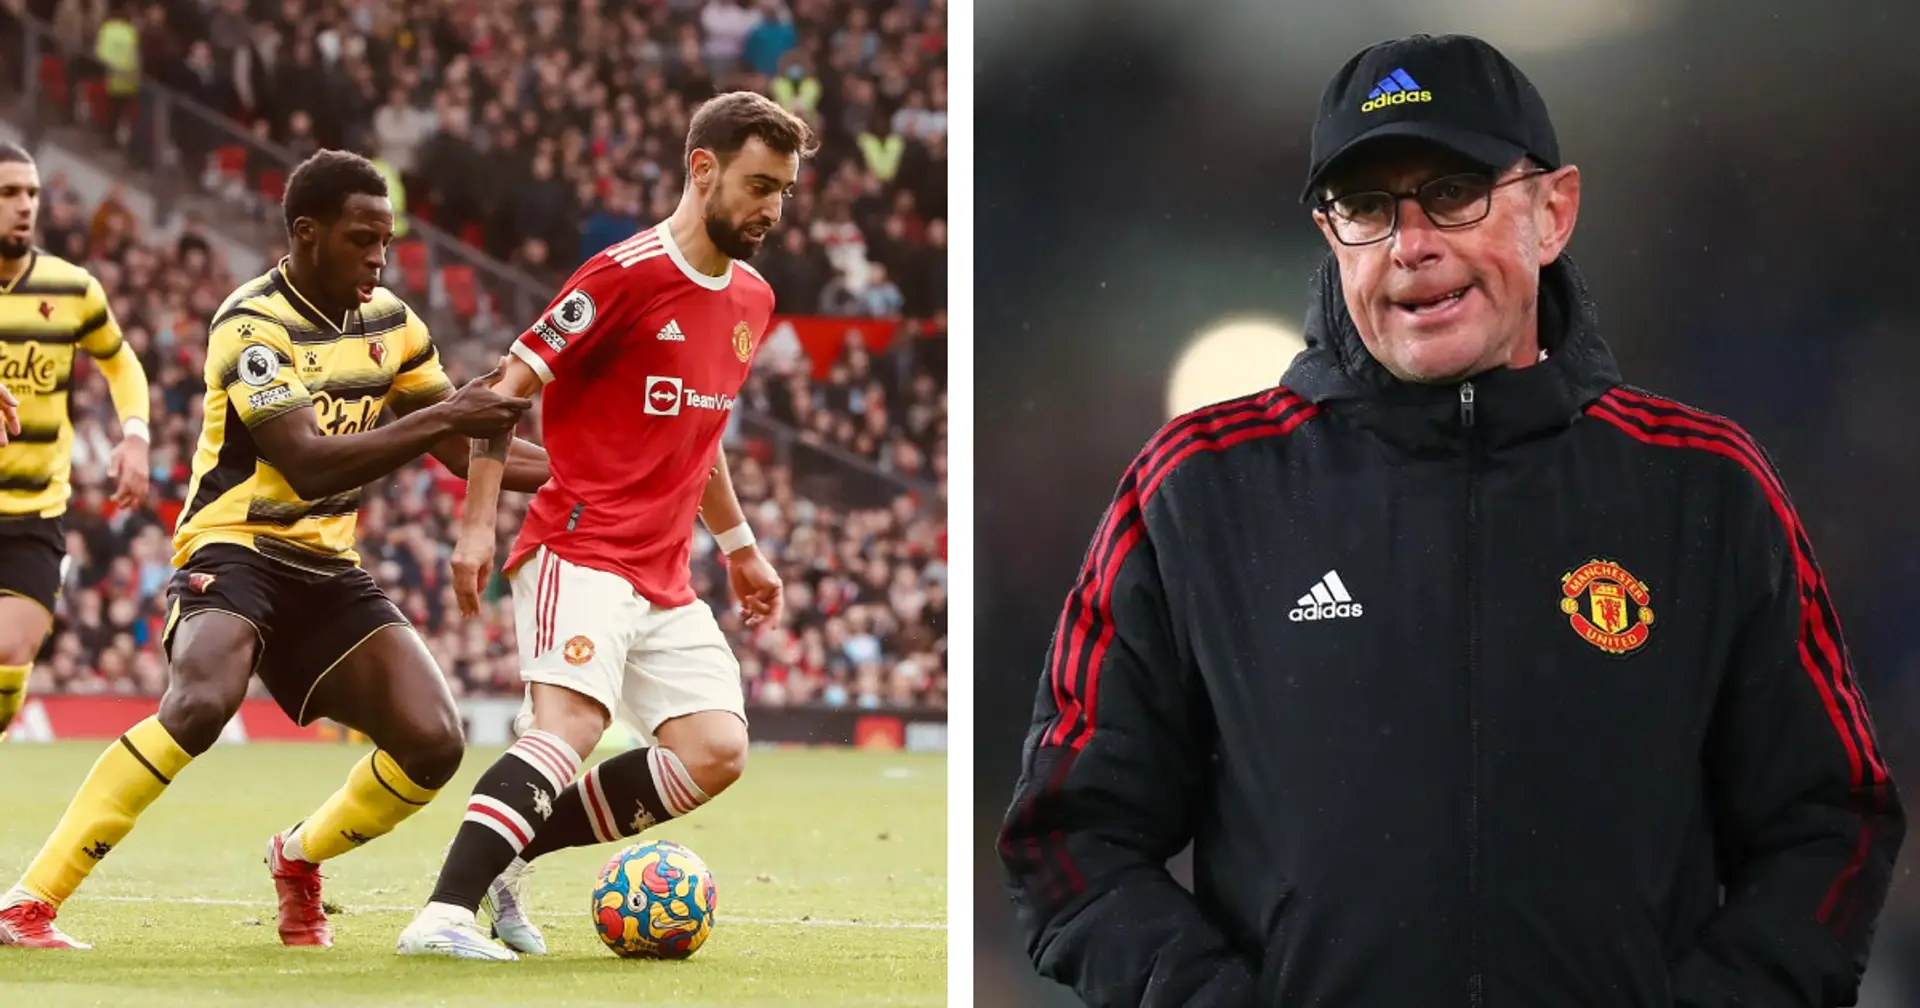 'That draw is NOT on Rangnick, it's 100% on the players': Man United fans pissed with Watford stalemate